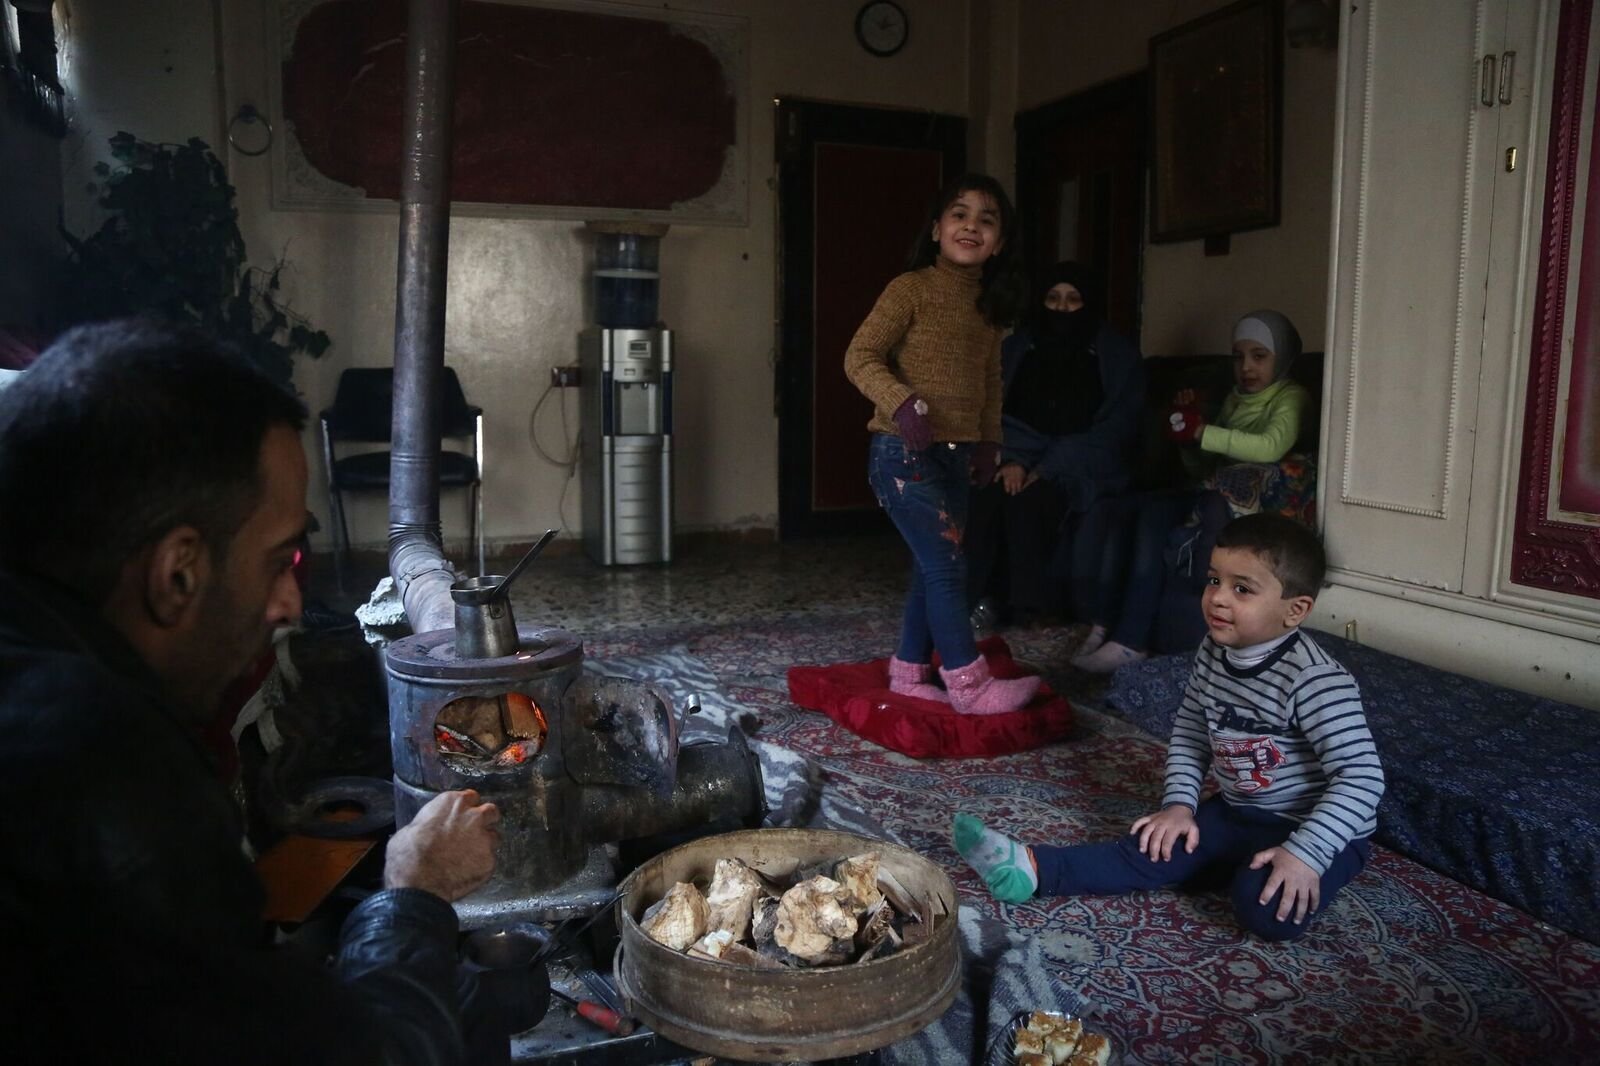 <strong>Engie stands in the living room with her family during a cold winter evening in east Ghouta. She suffers a severe case of haemophilia&nbsp;and needs to receive regular injections that are not available in east Ghouta.</strong>